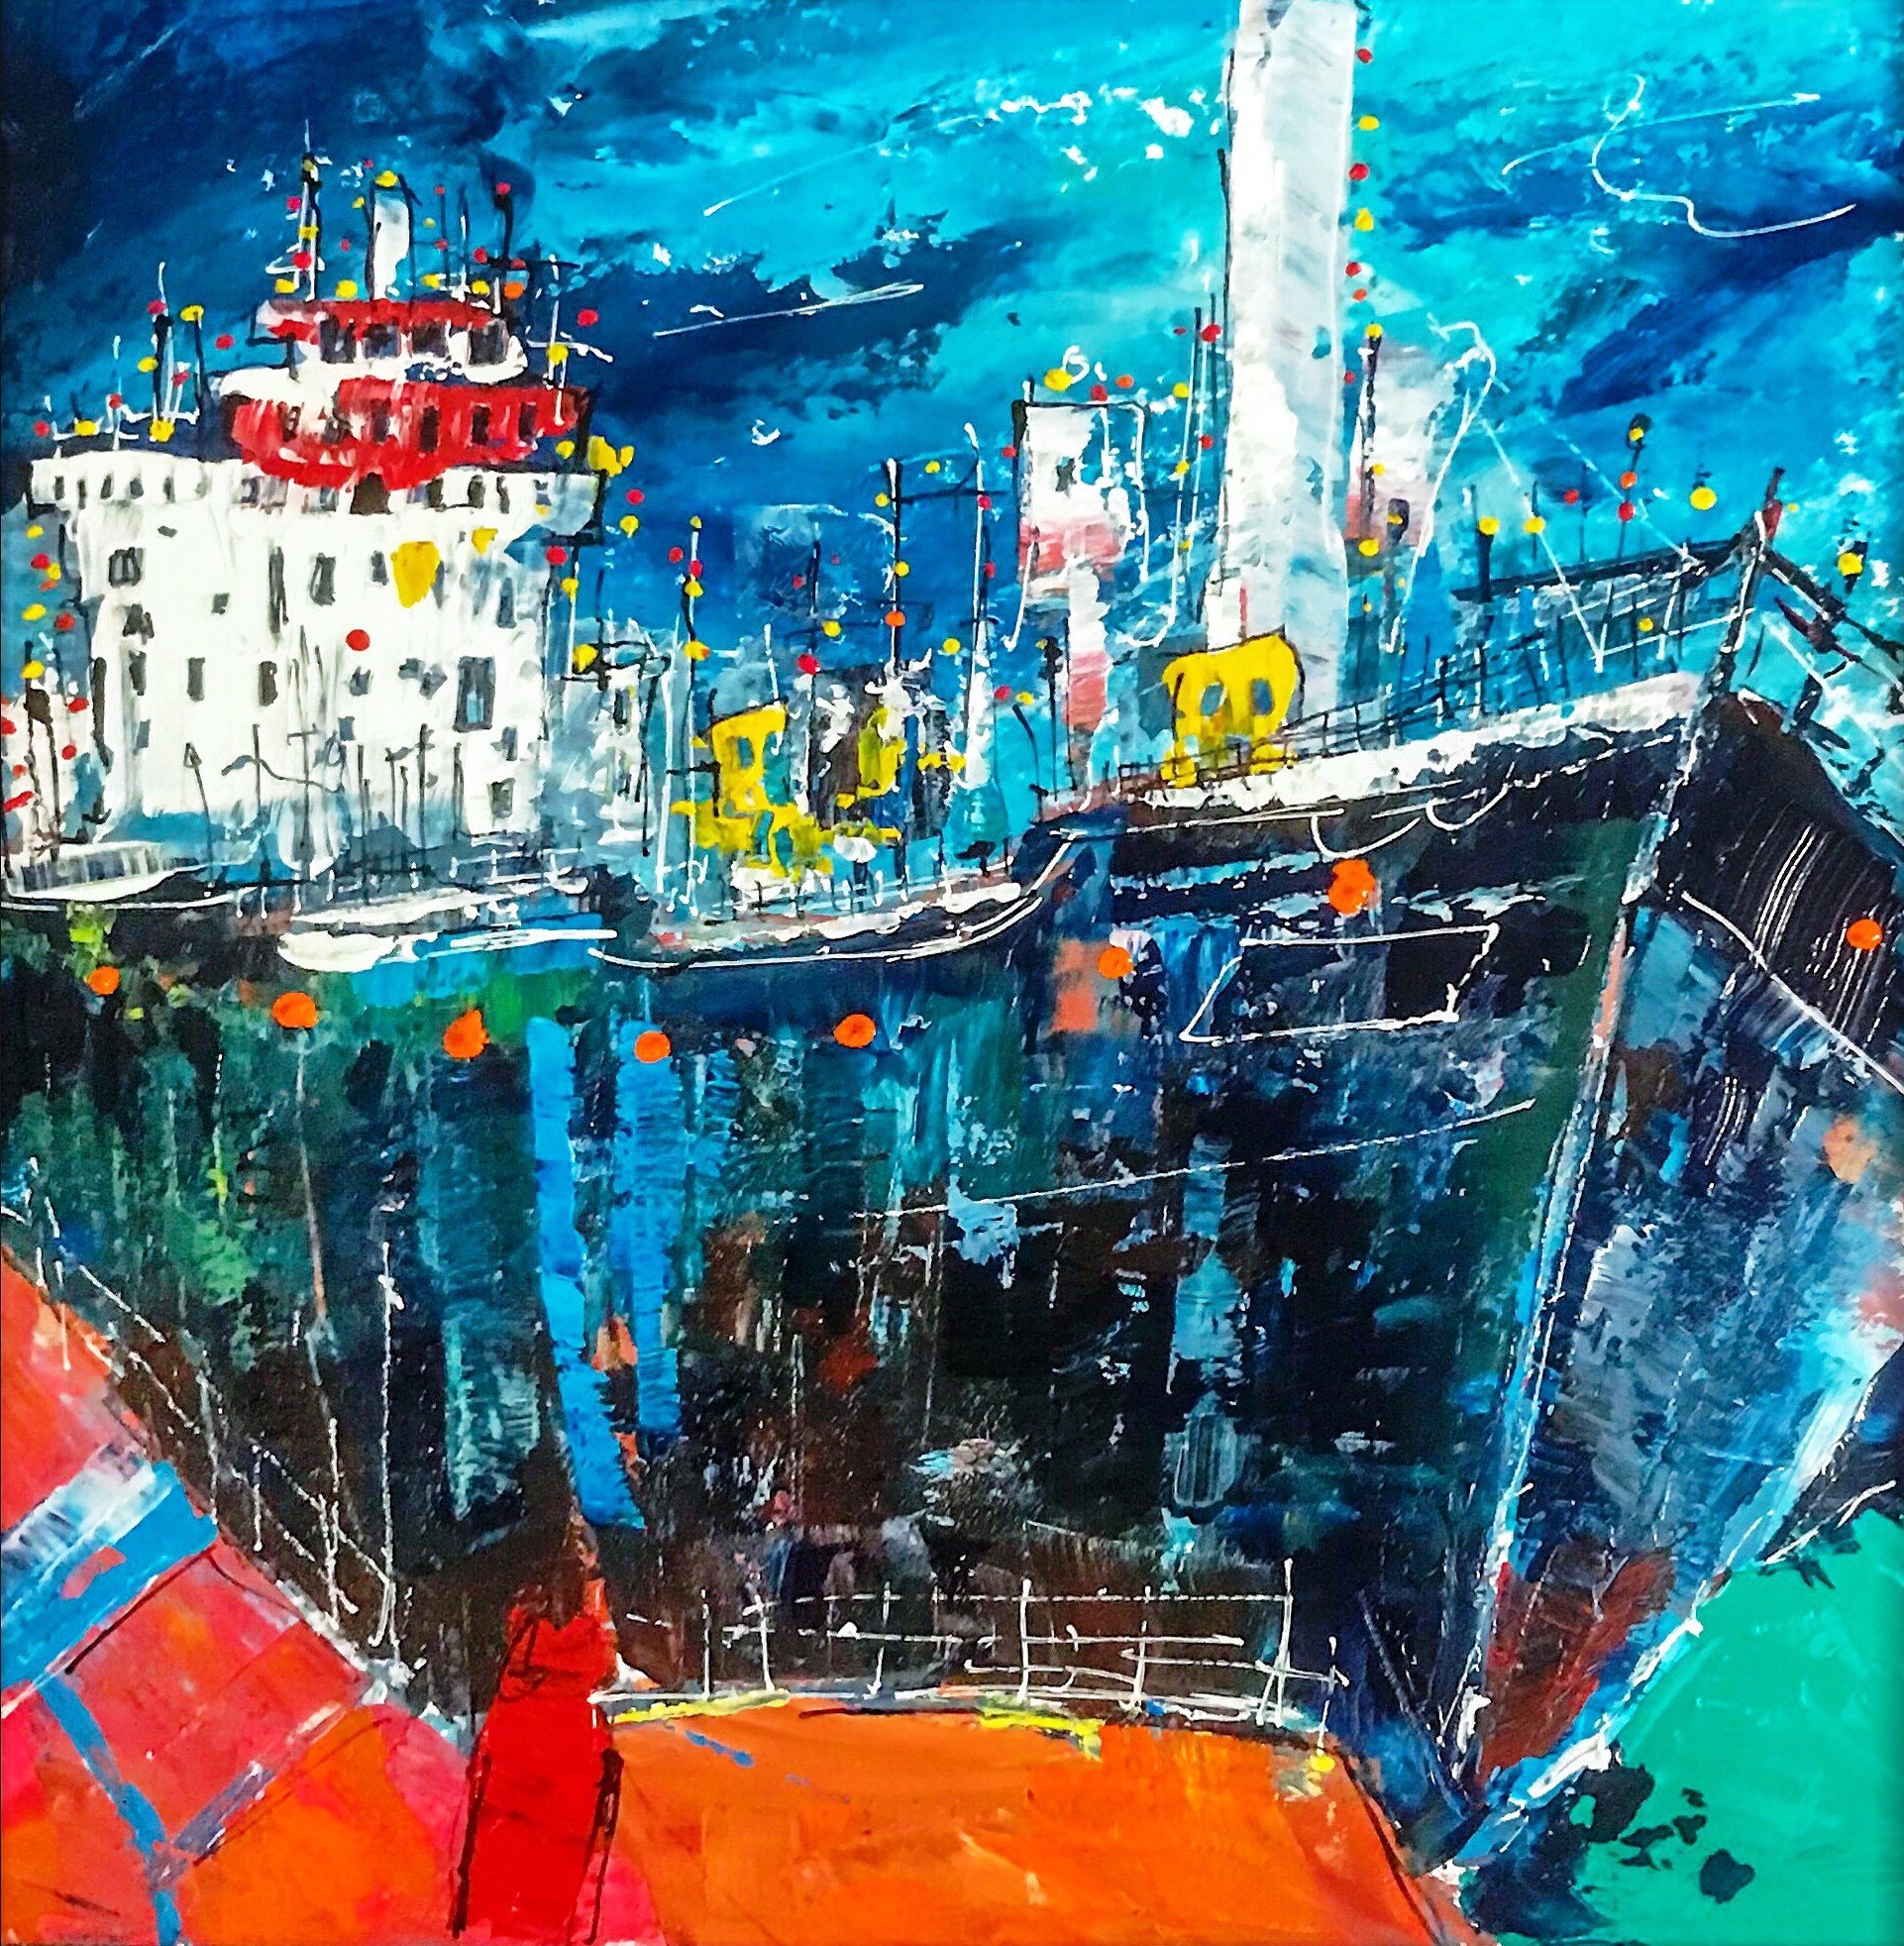 'Busy Harbour' by artist Martin John Fowler